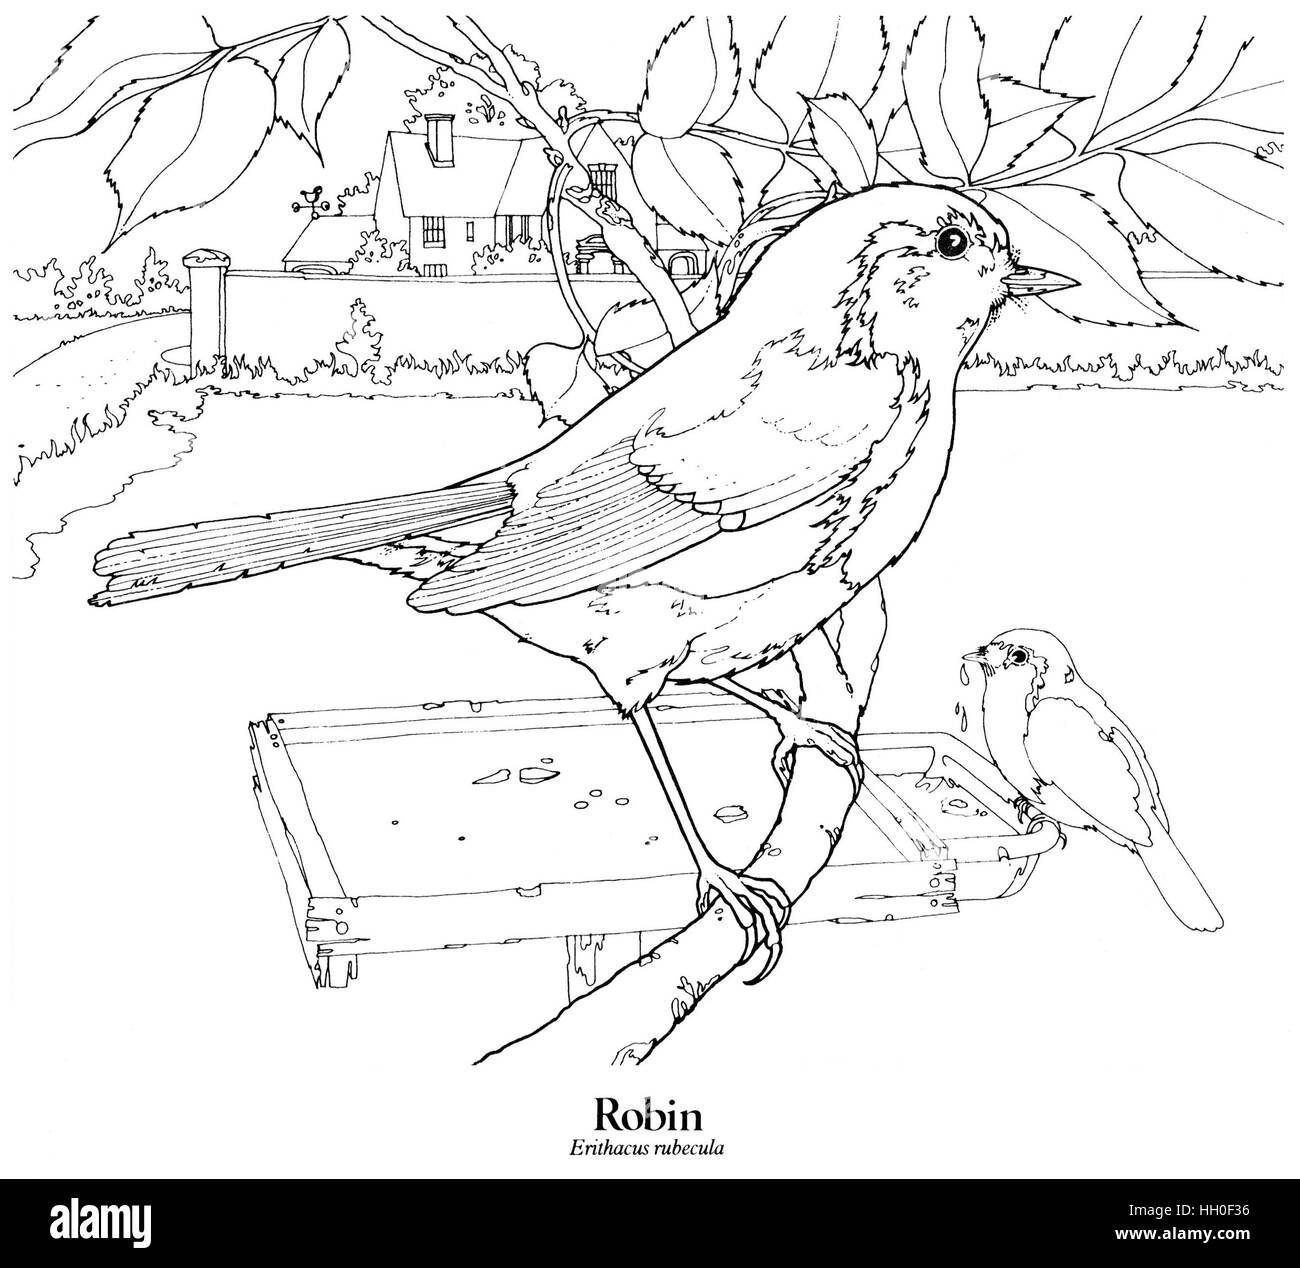 Robin Erithacus rubecula. A British resident and the National Bird of Britain. Black on white line drawing. Stock Photo